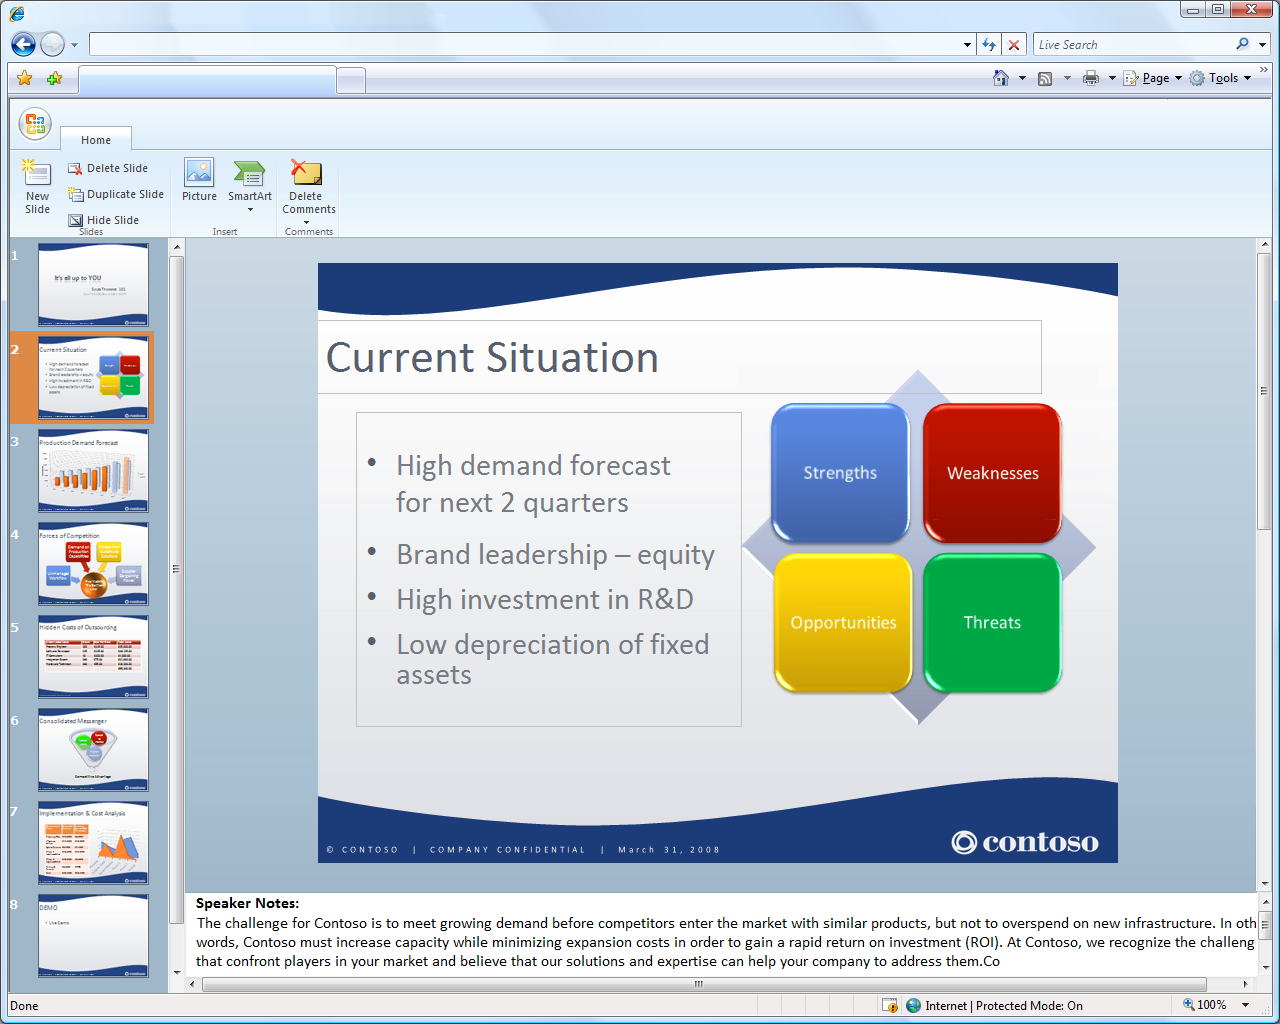 ms office web component(Powerpoint)